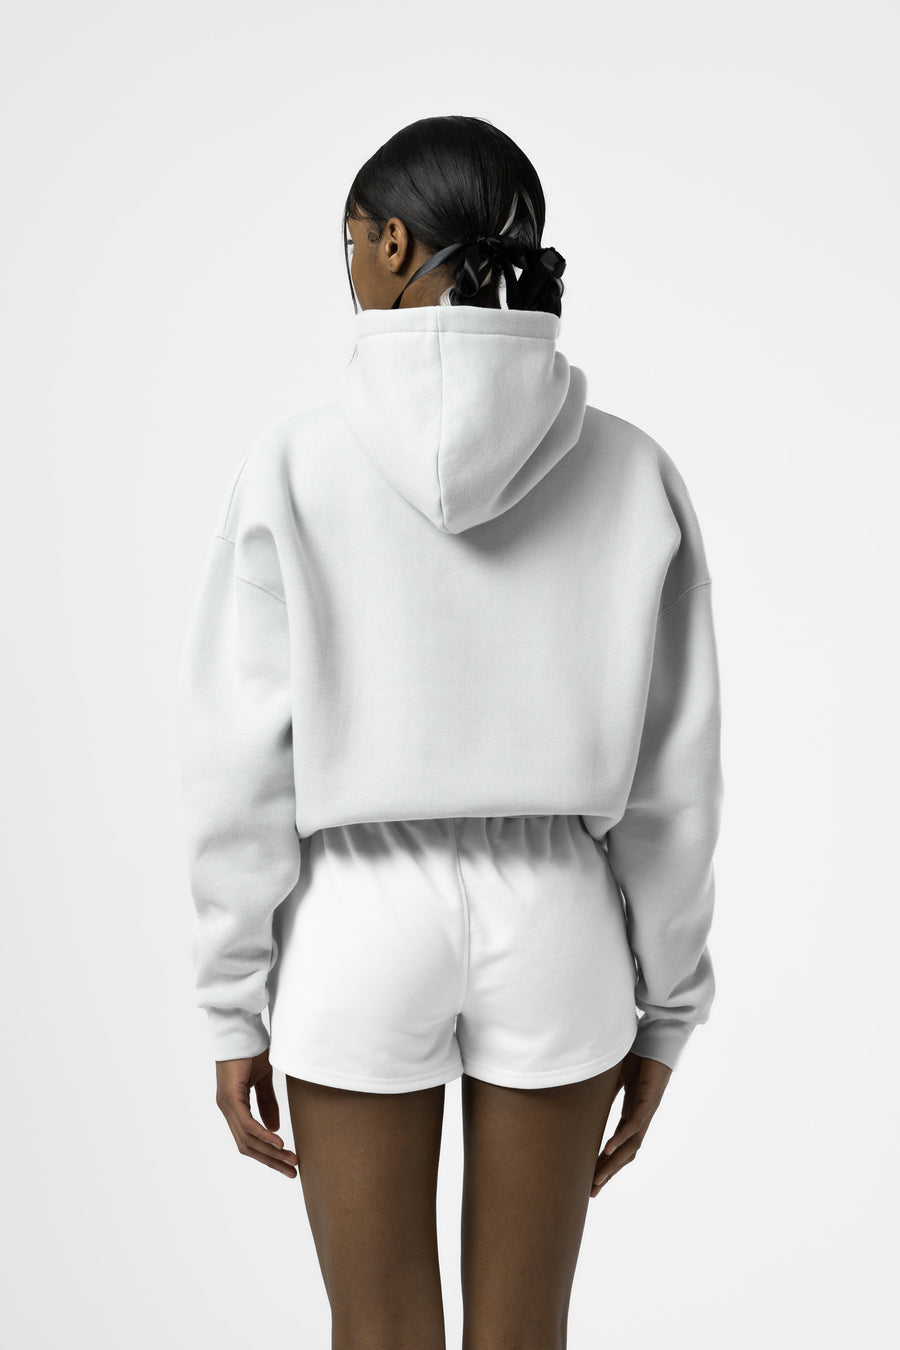 SOFTGIRL Hoodie in Shallow